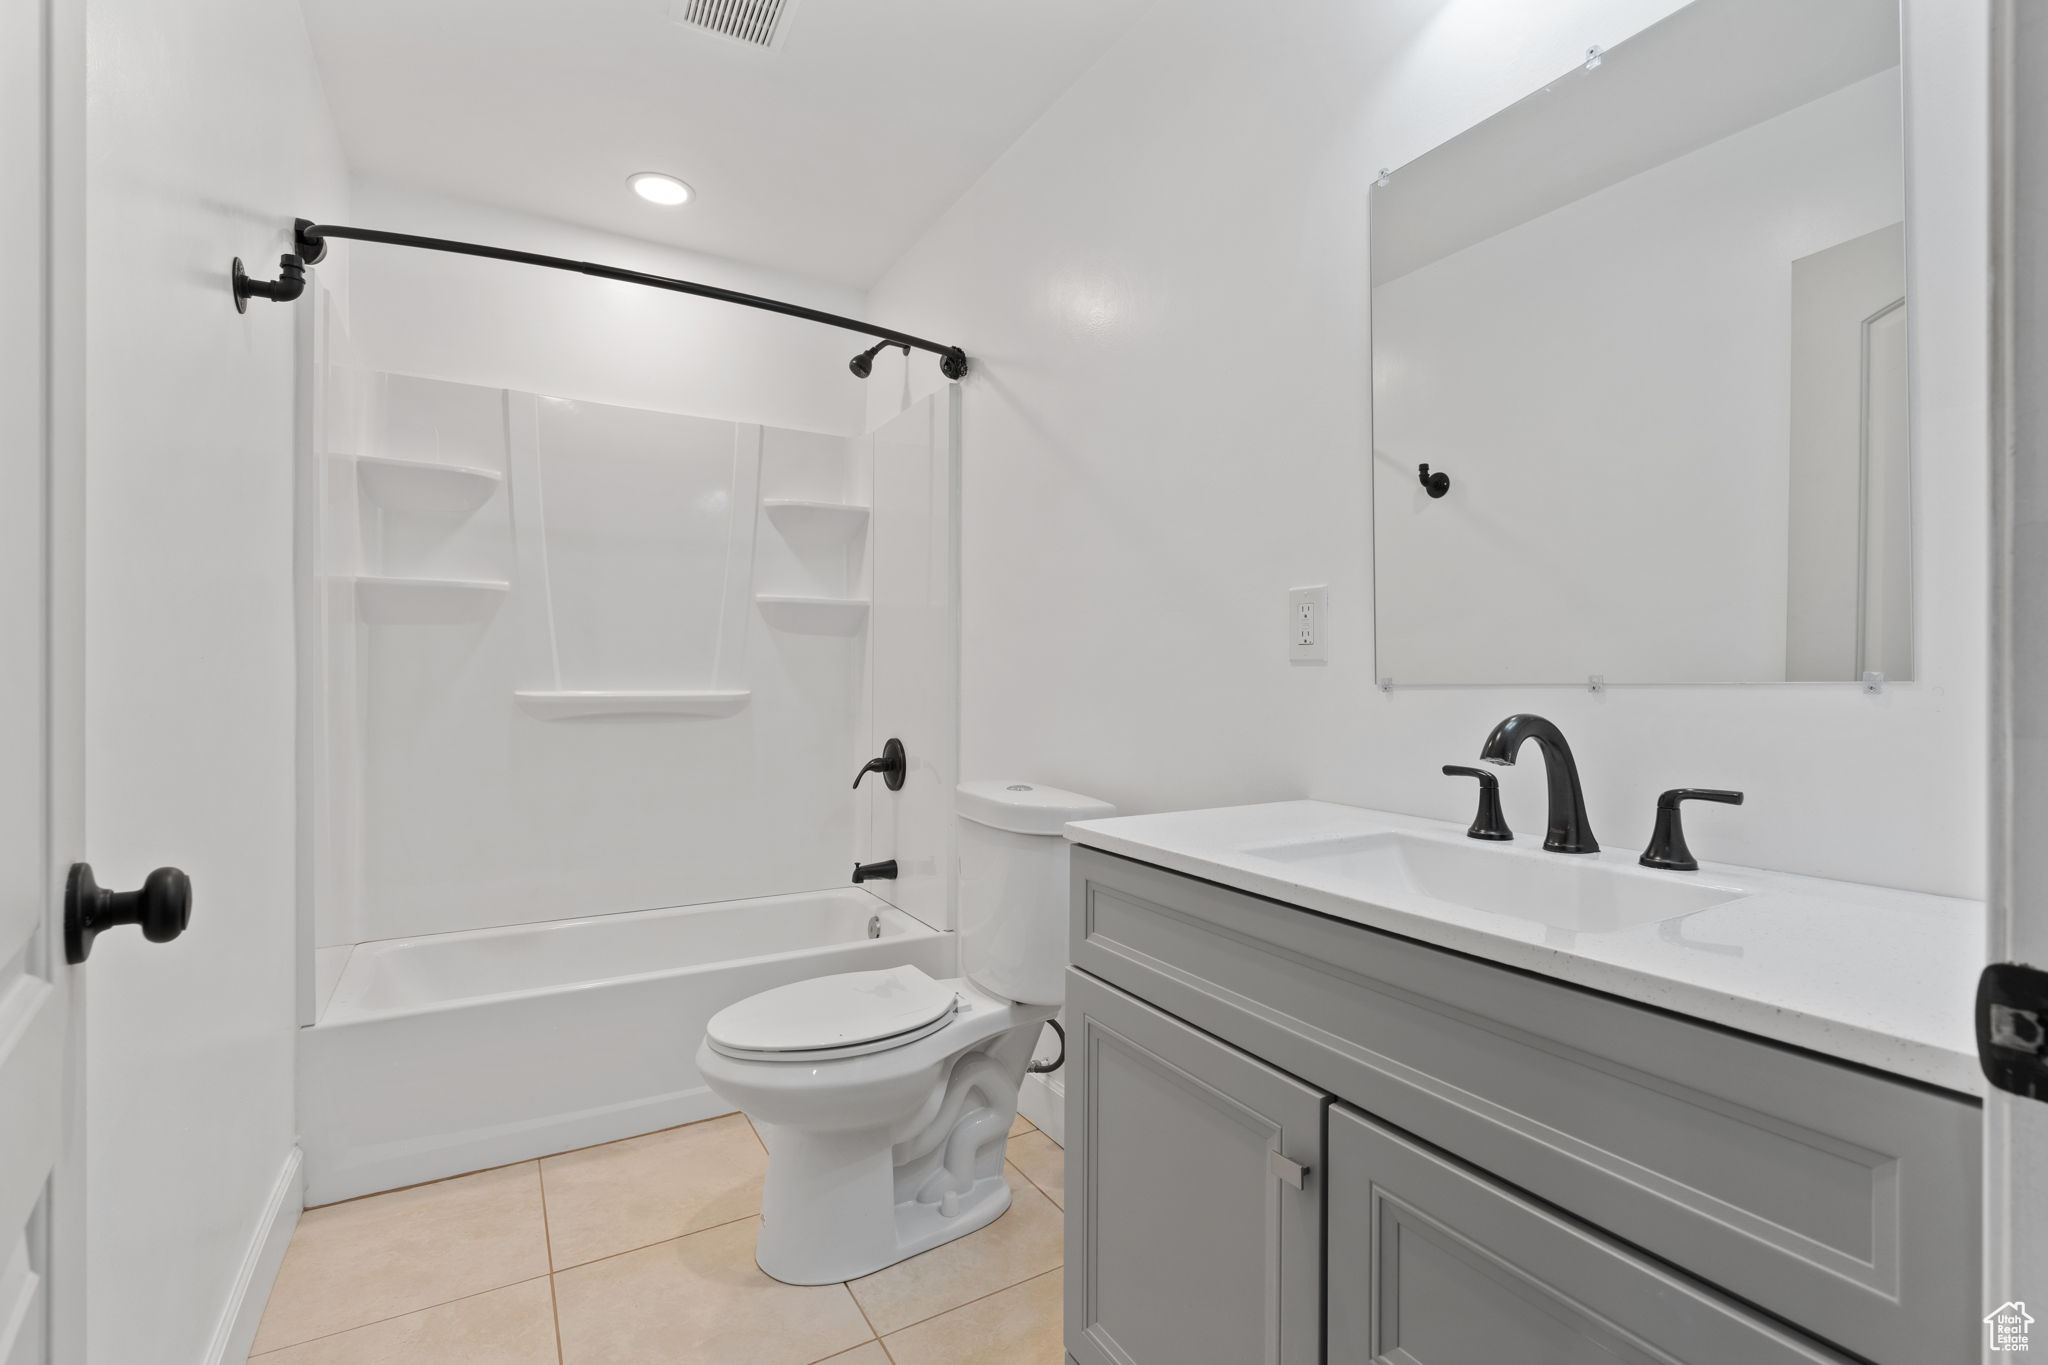 Full bathroom with vanity with extensive cabinet space, toilet, tile floors, and bathing tub / shower combination